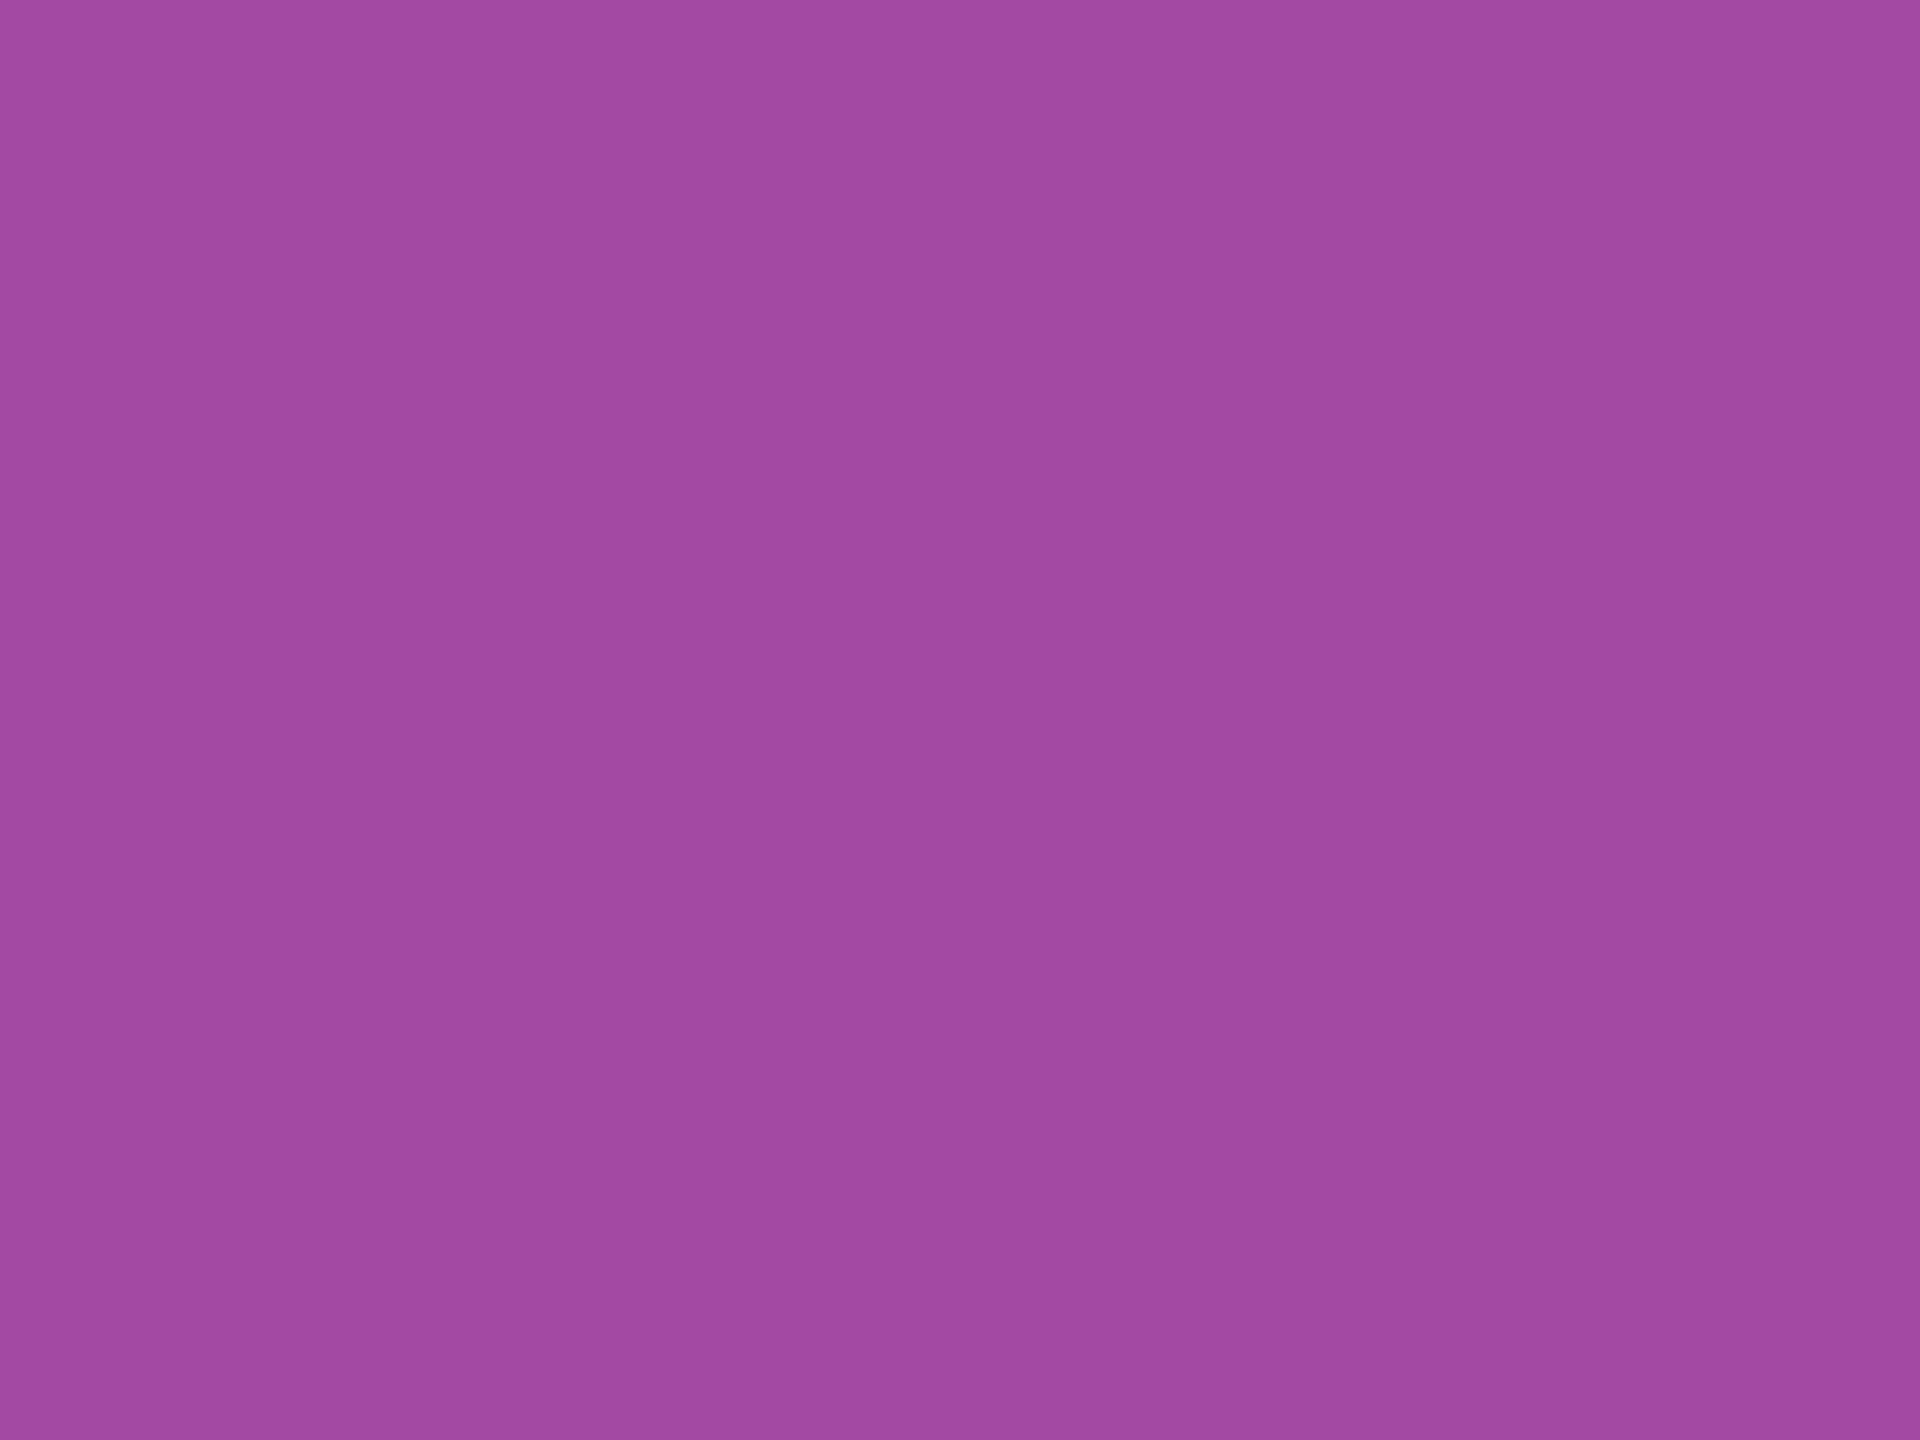 Solid Purple Background Free Stock Photo HD Public Domain Pictures